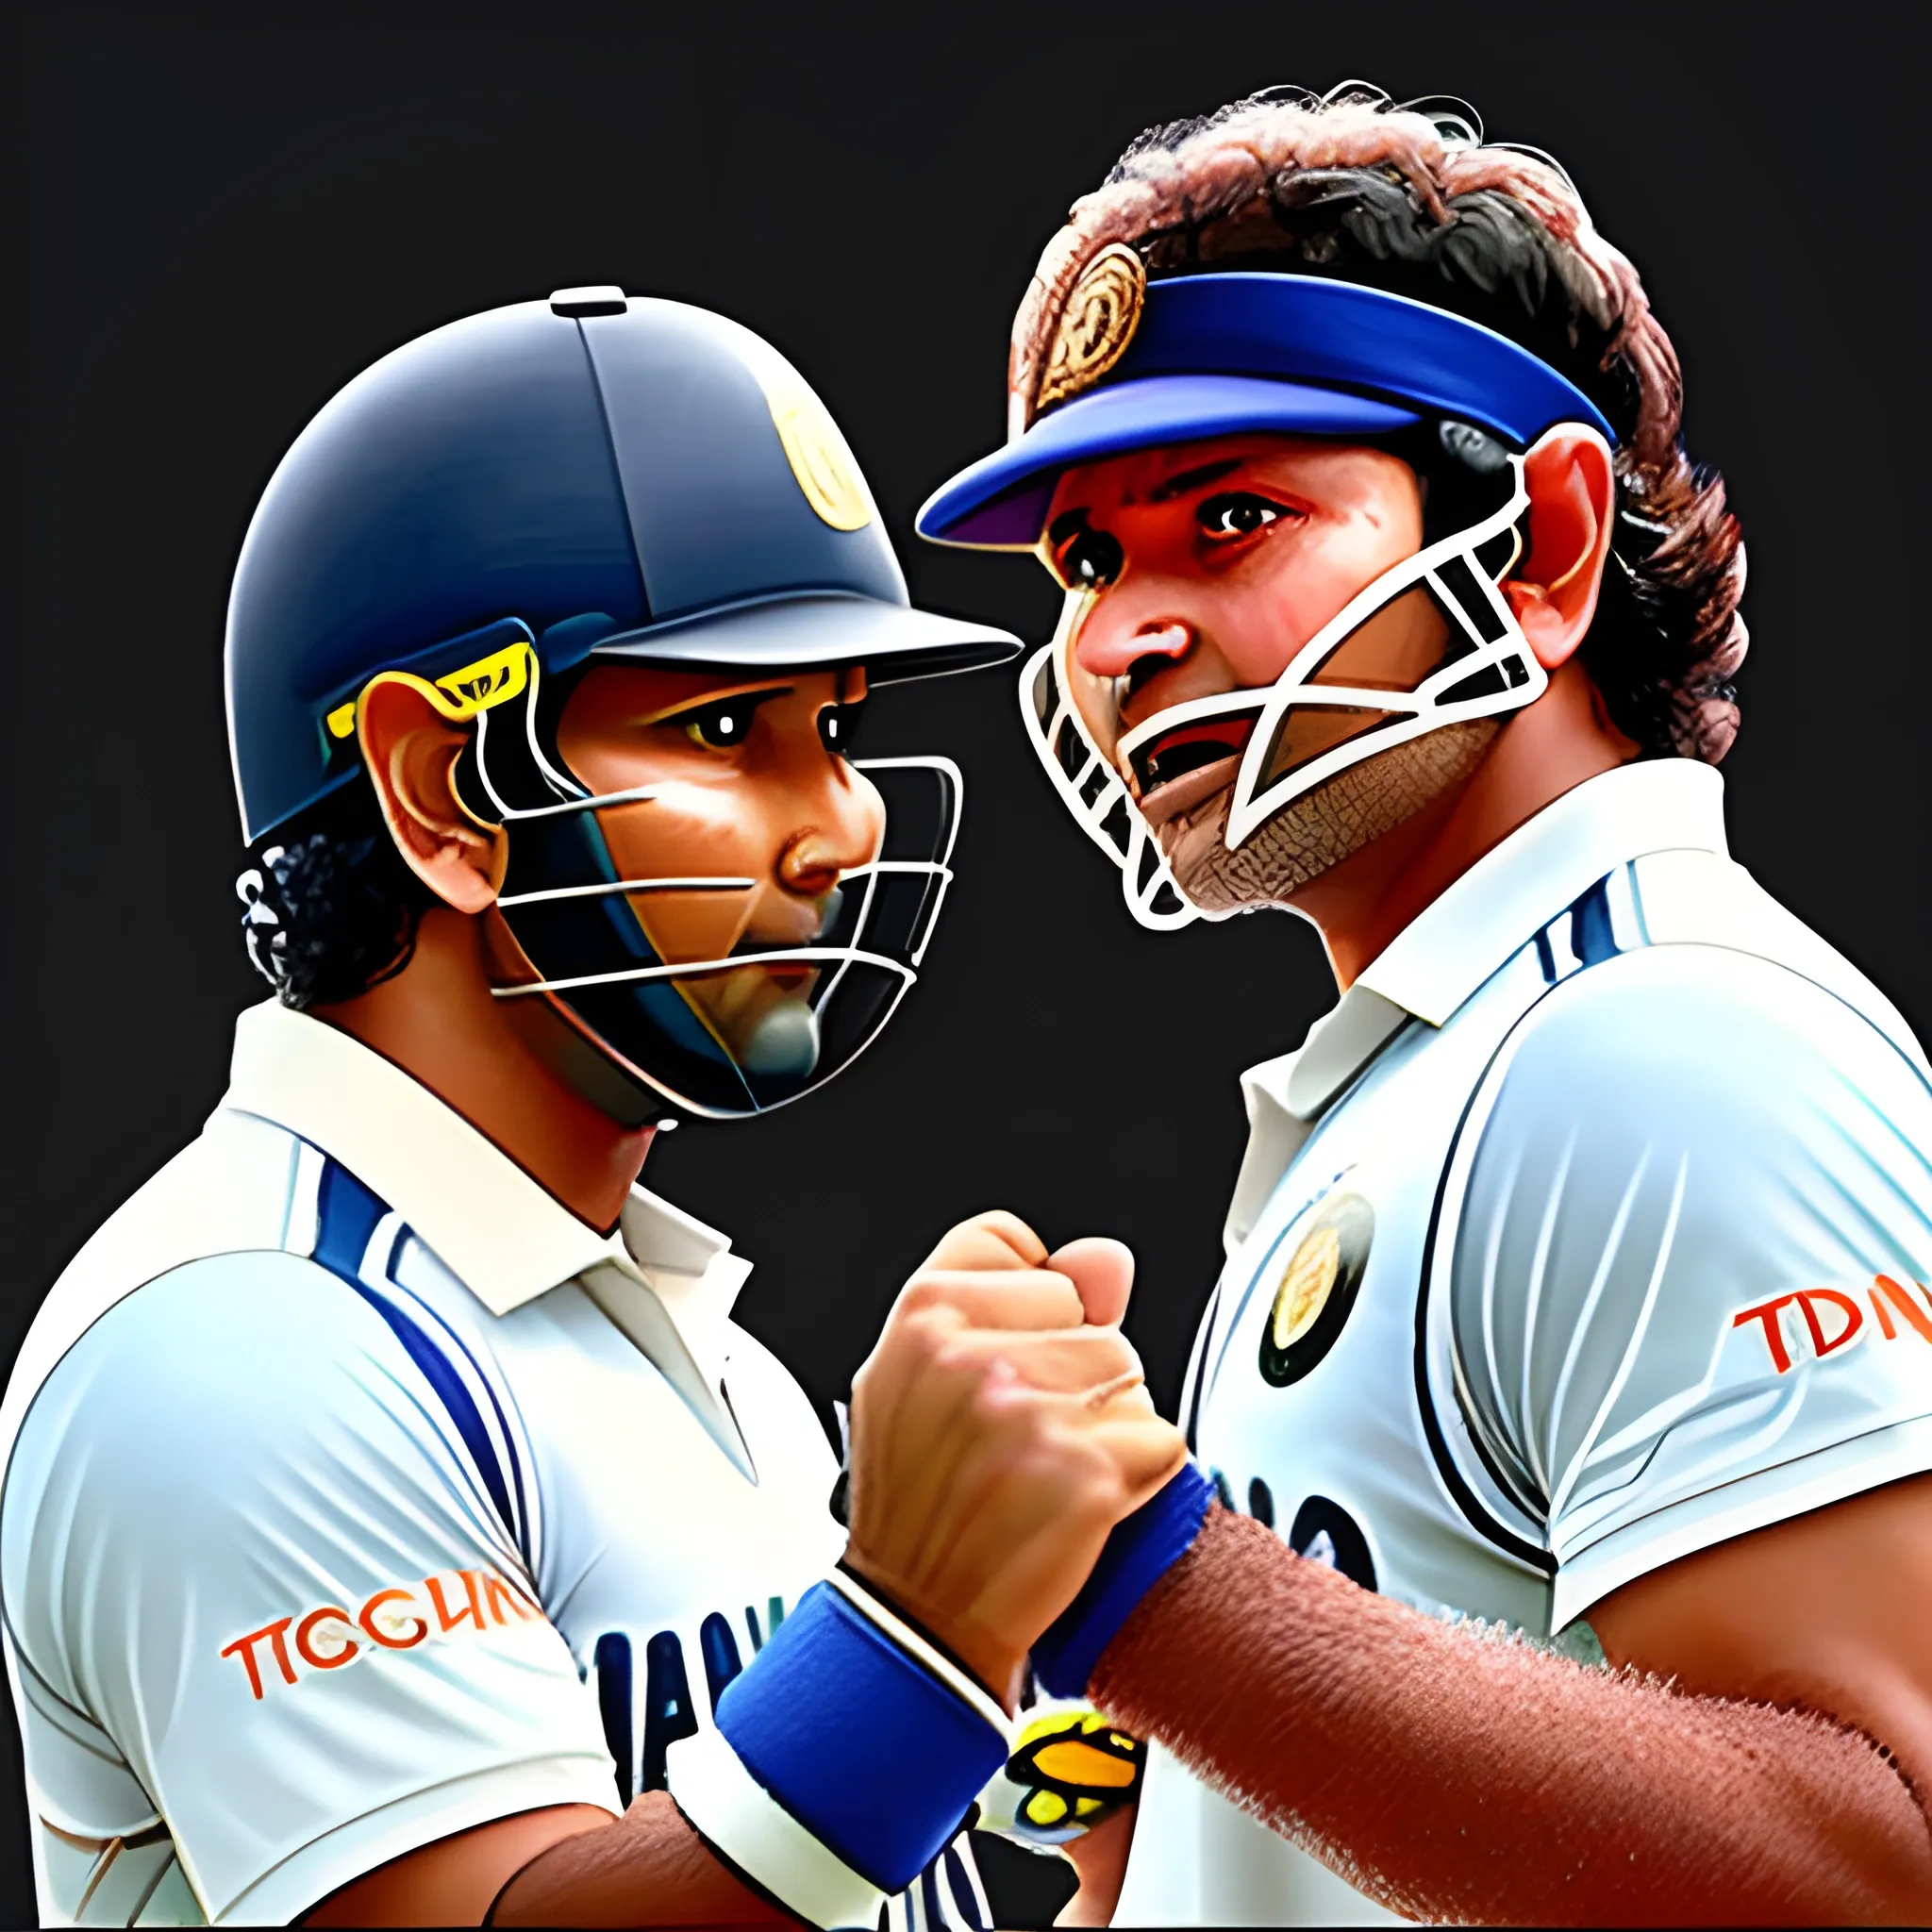 ((Sachin Tendulkar)) and RAhul Dravid fighting with each other with bat in hand, ultra HD, hyper realistic, great face details